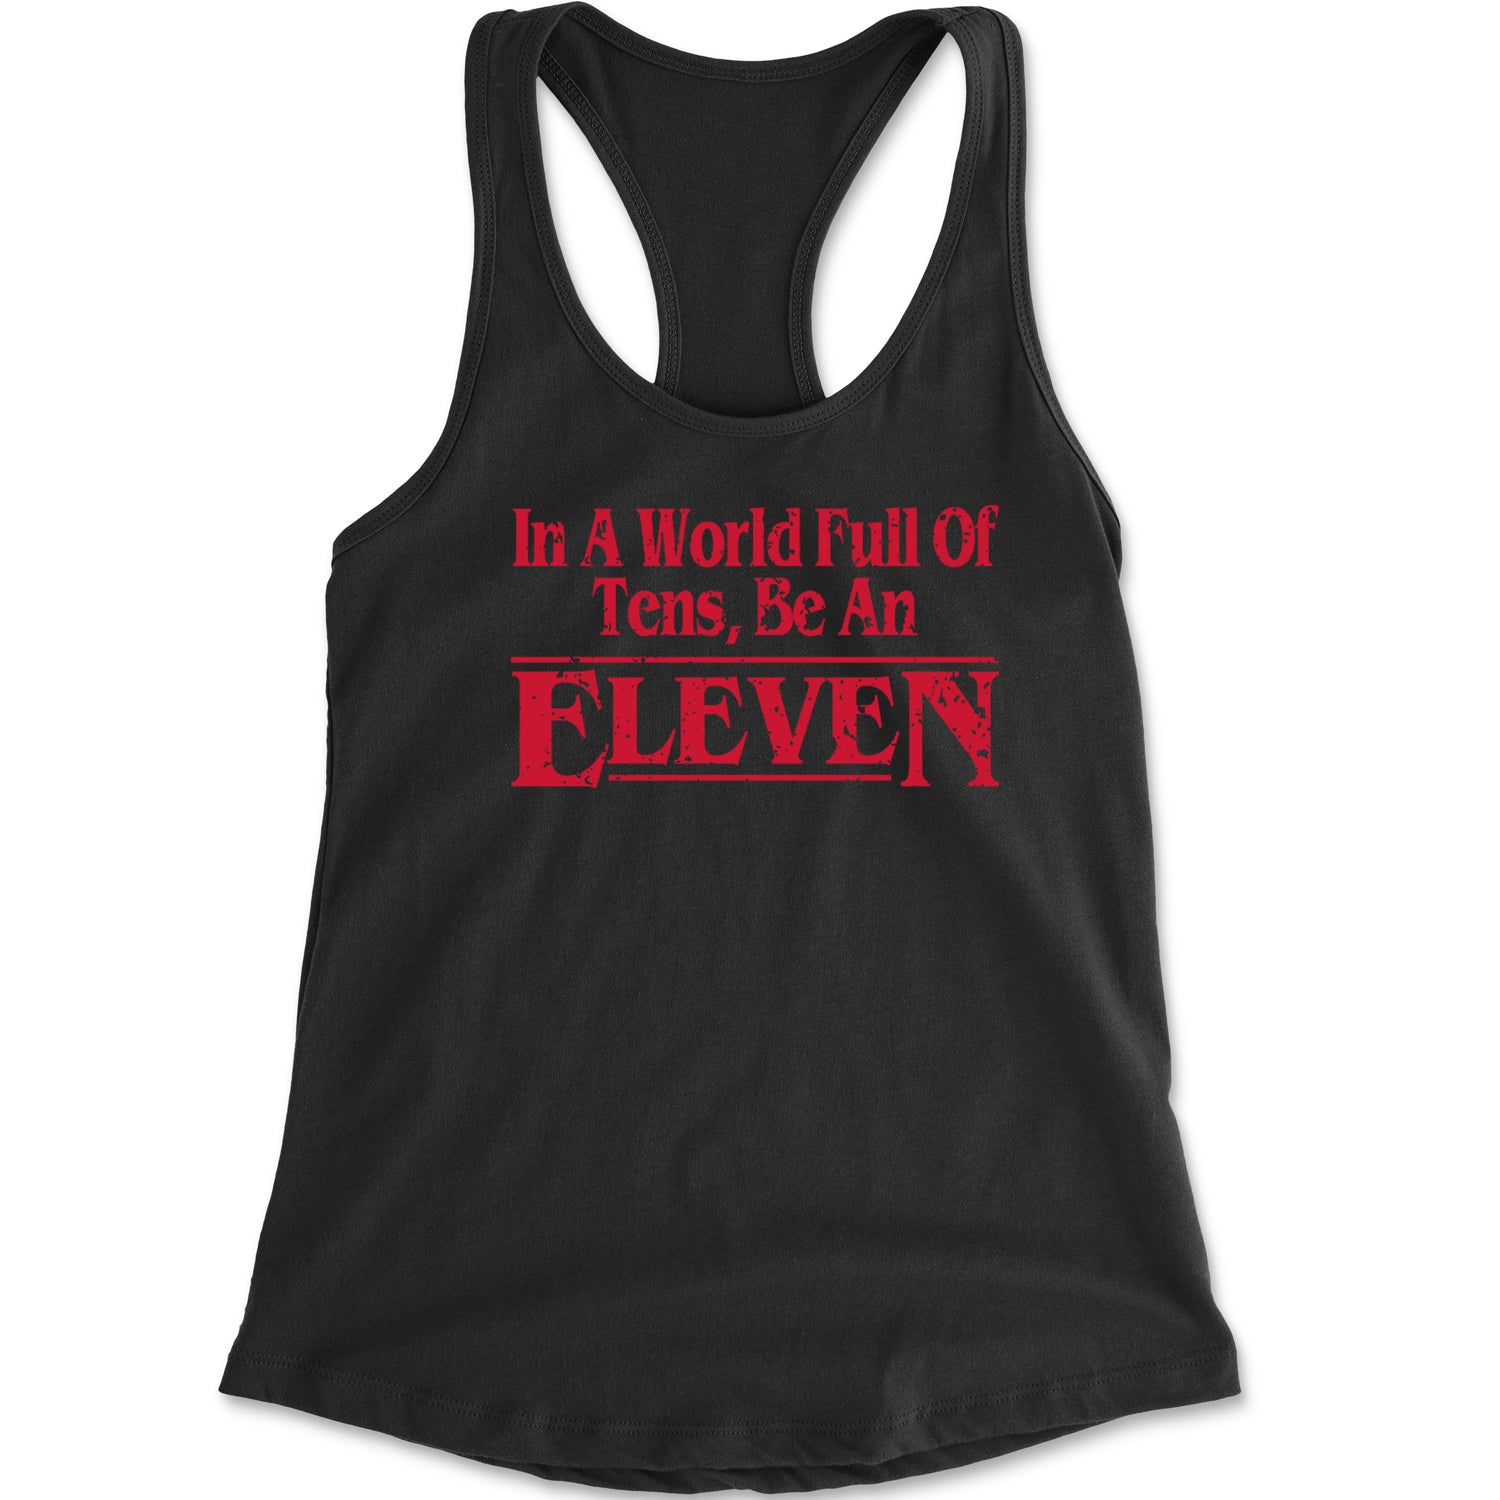 In A World Full Of Tens, Be An Eleven Racerback Tank Top for Women